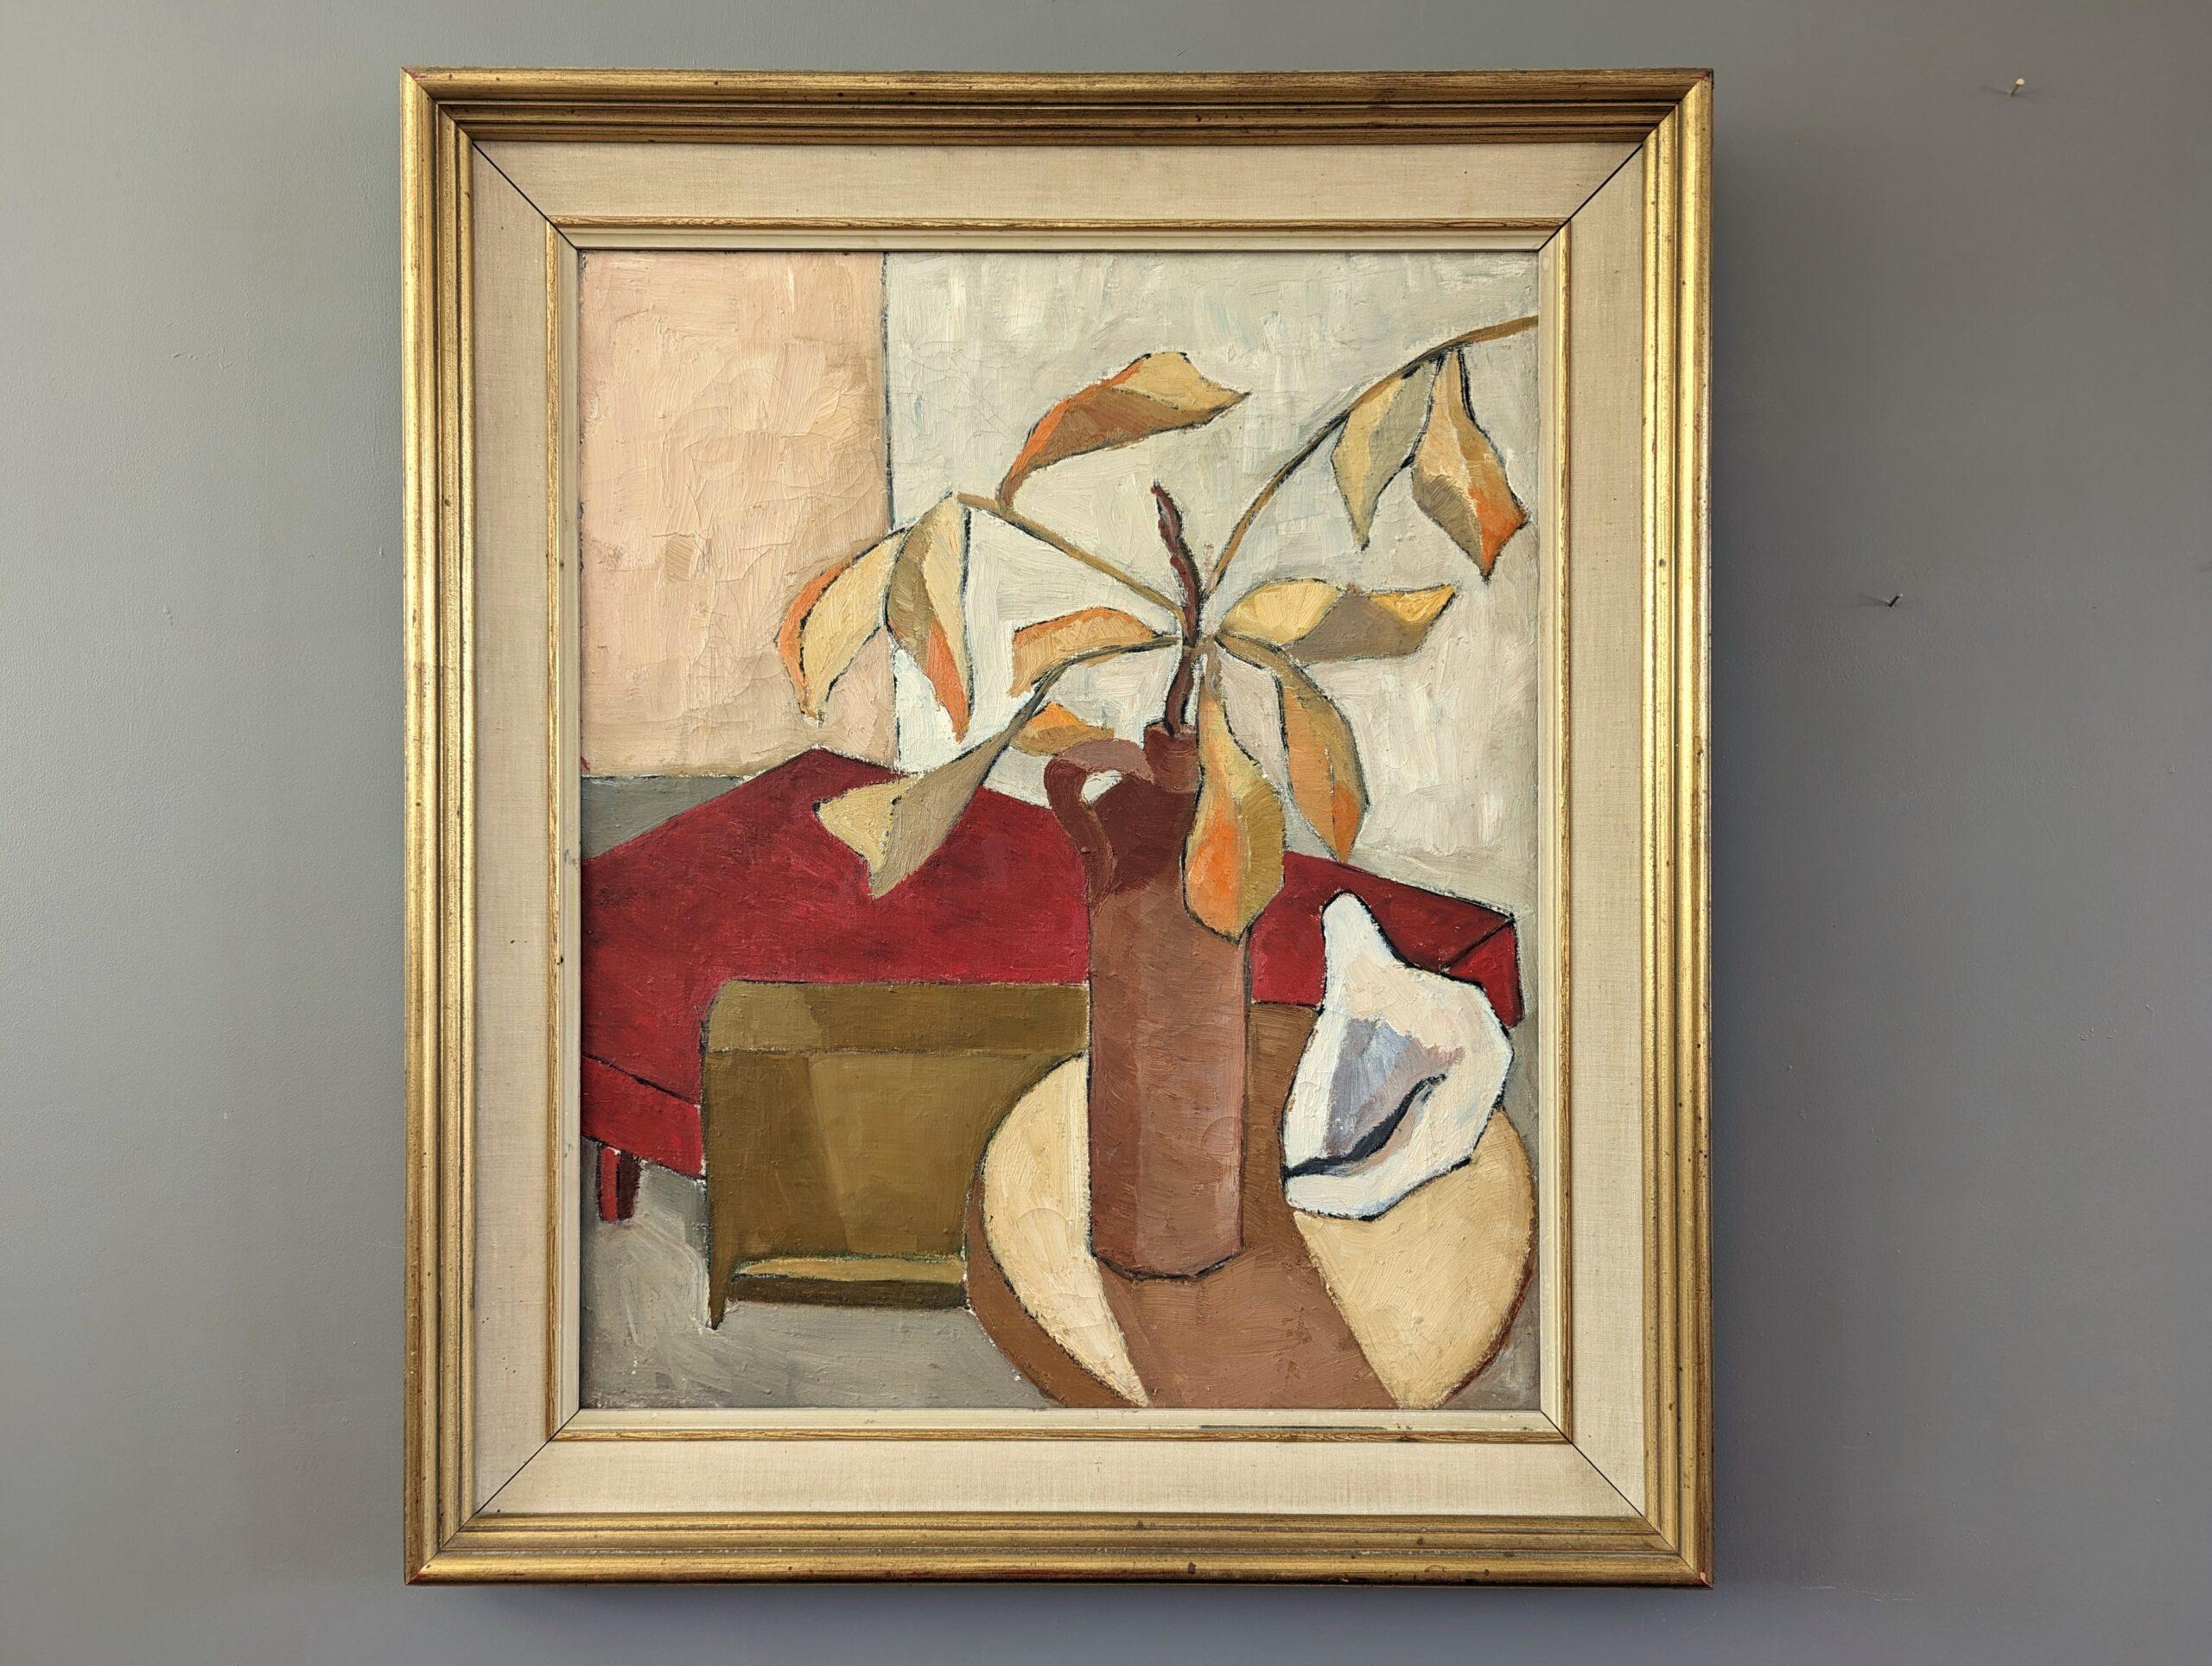 AUTUMN LEAVES 
Size: 69 x 60 cm (including frame)
Oil on Canvas 

A well-balanced mid-century modernist still life composition in oil, painted onto canvas.

Using a distinctly autumnal colour palette comprising earthy brown, orange, rich red, and